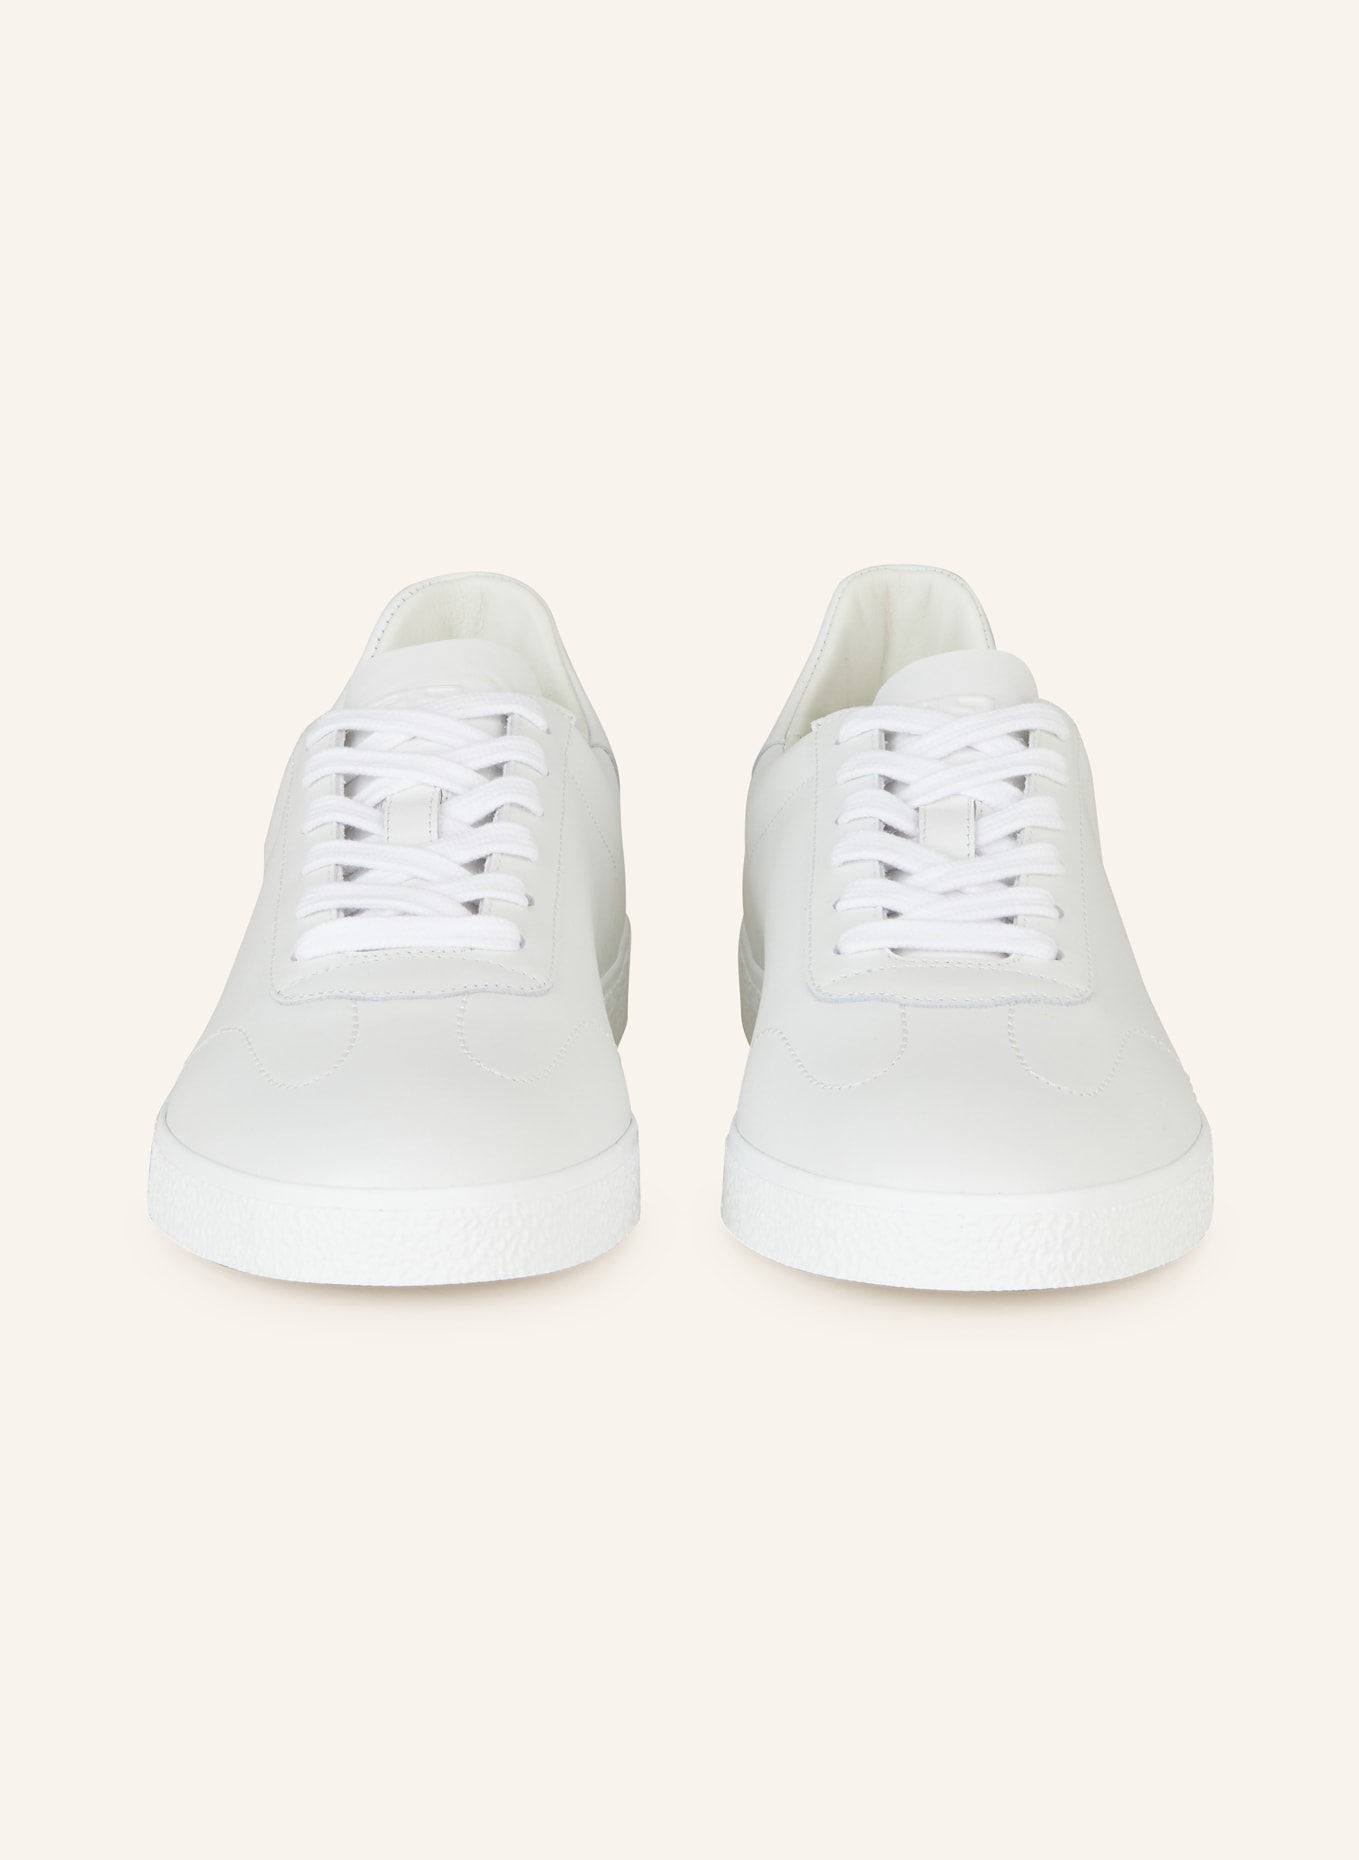 GIVENCHY Sneaker TOWN, Farbe: WEISS (Bild 3)